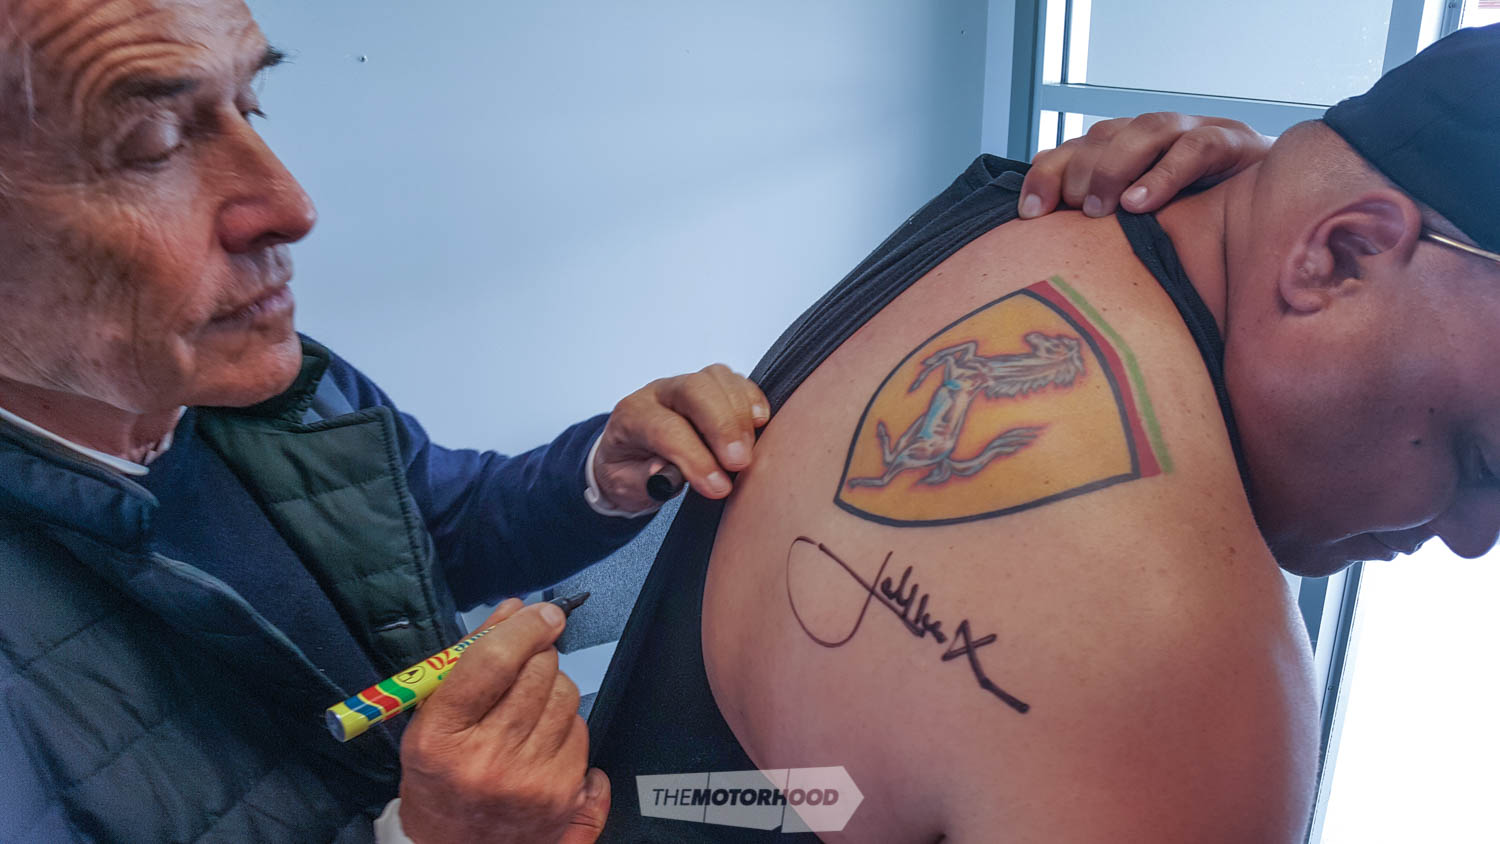 Jacky signs another autograph — this one to be tattooed